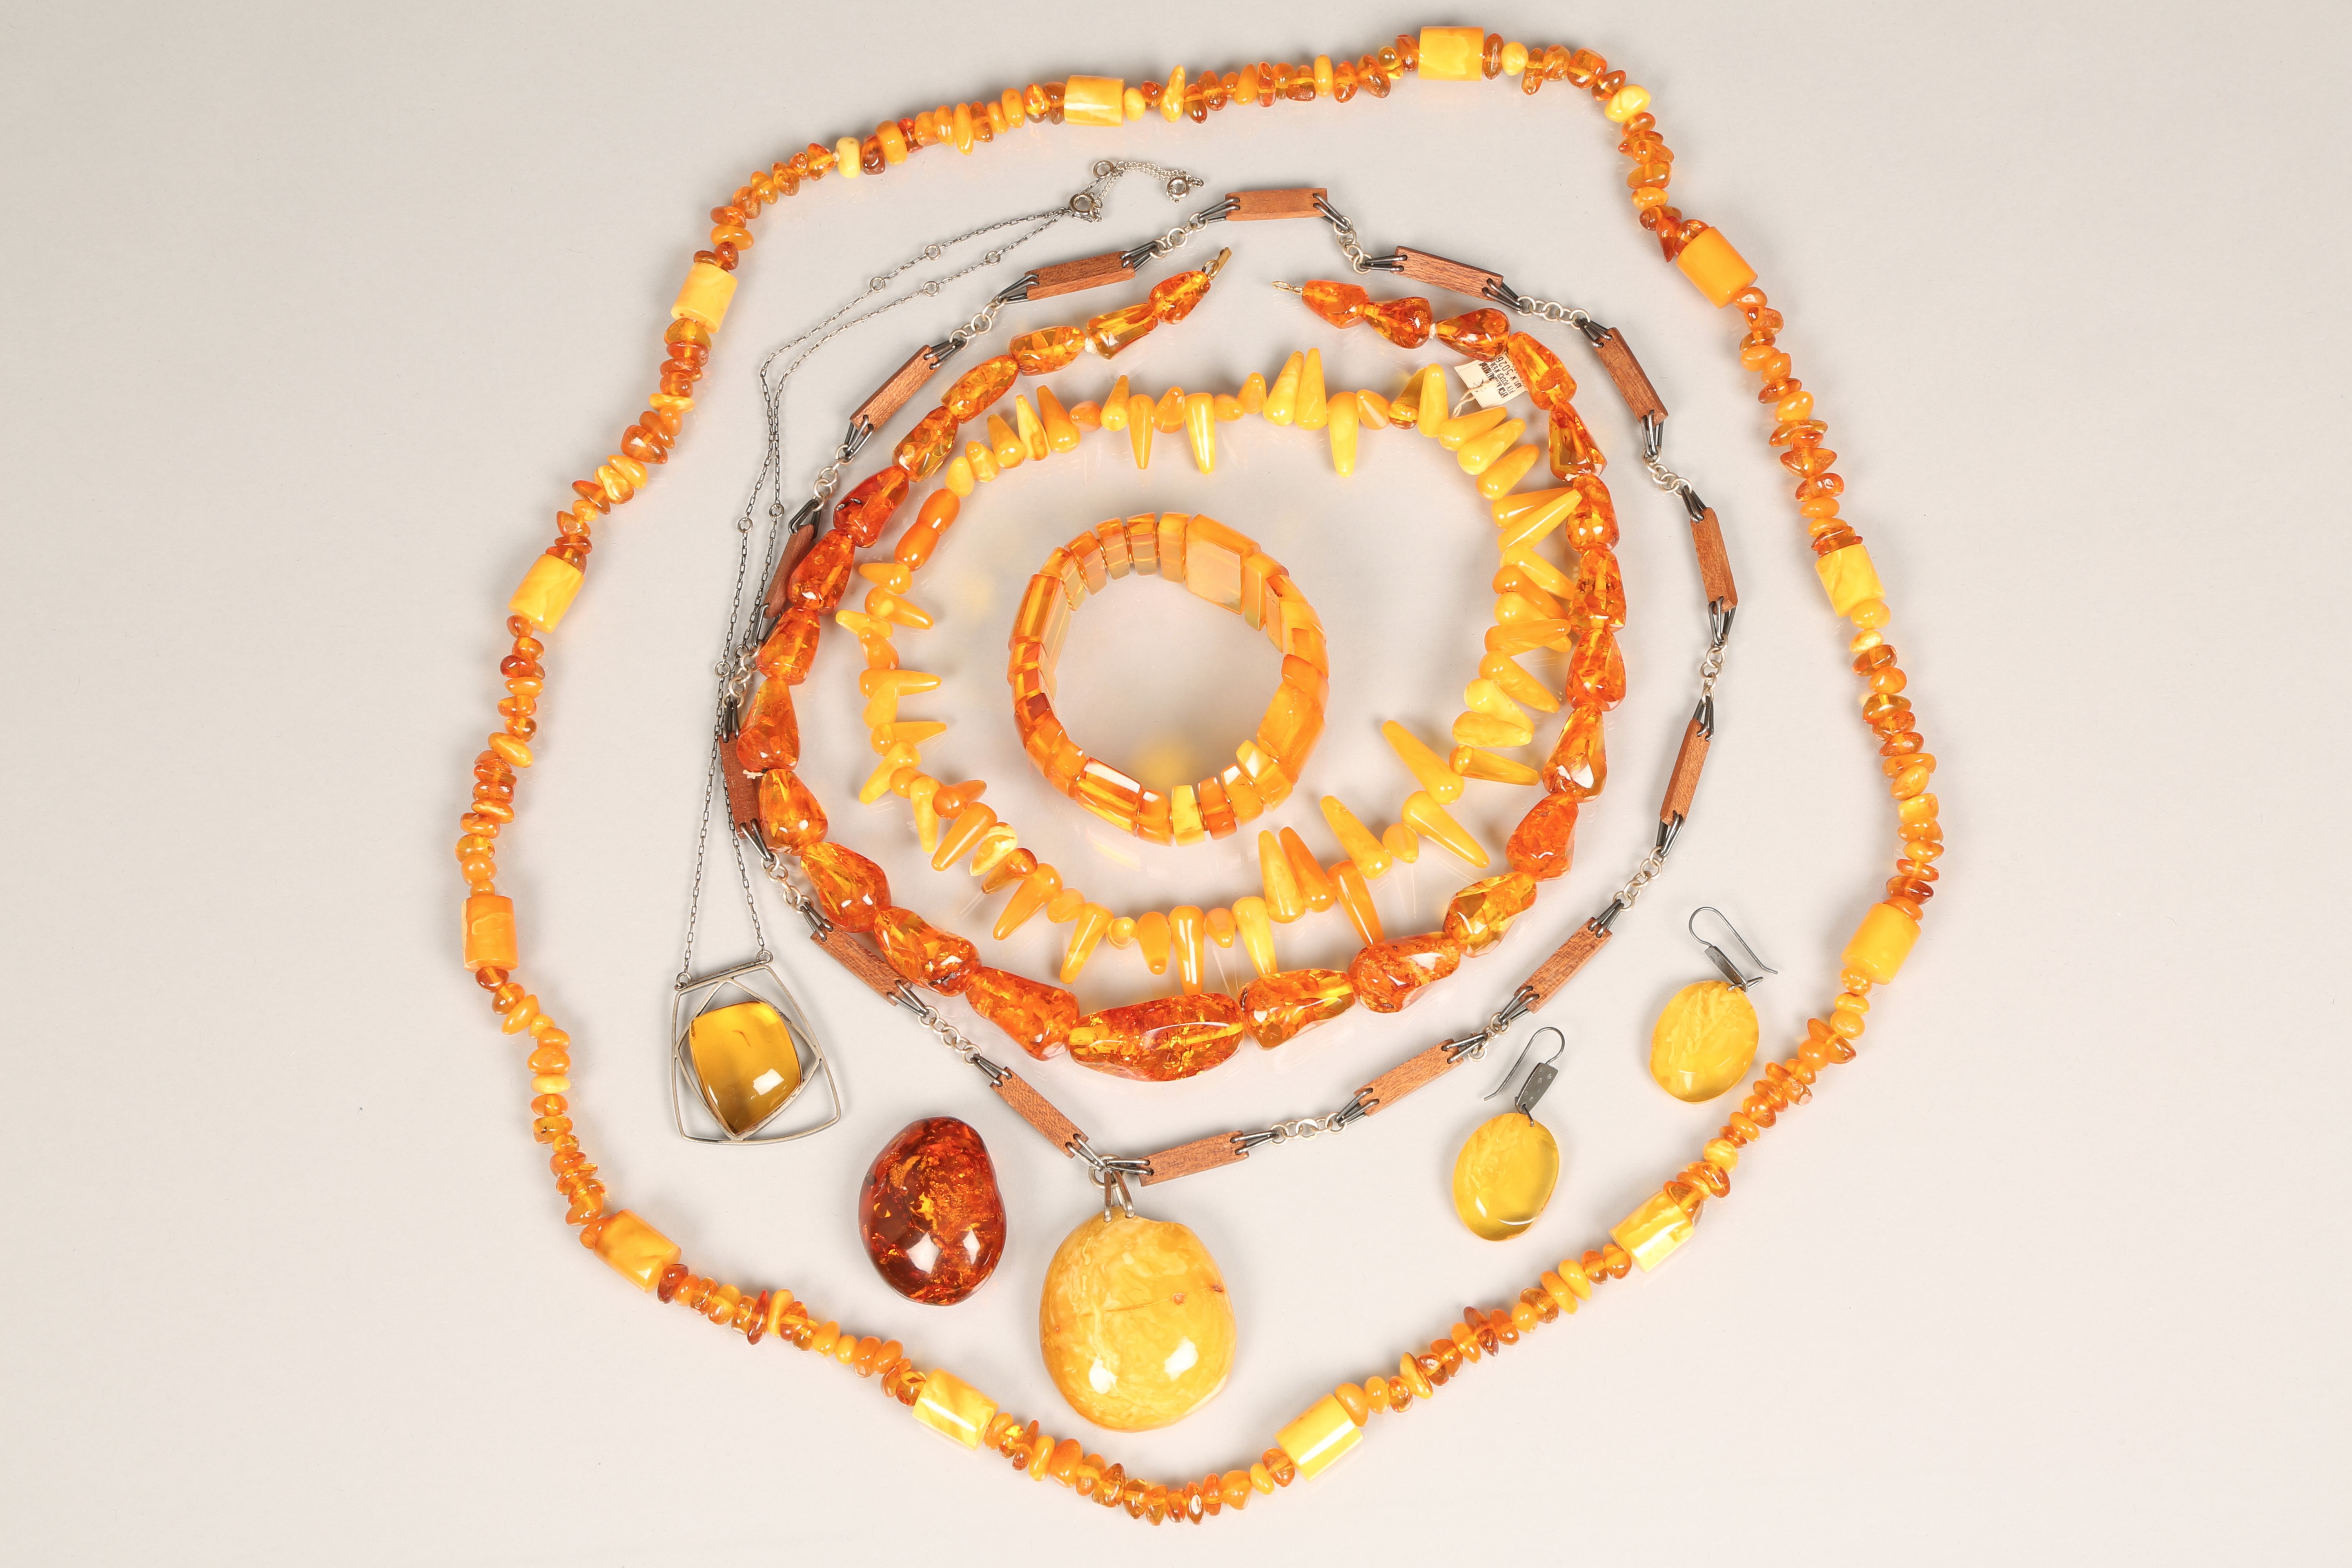 Group of assorted Baltic amber jewellery, including; three strings of amber, a pendant and earring